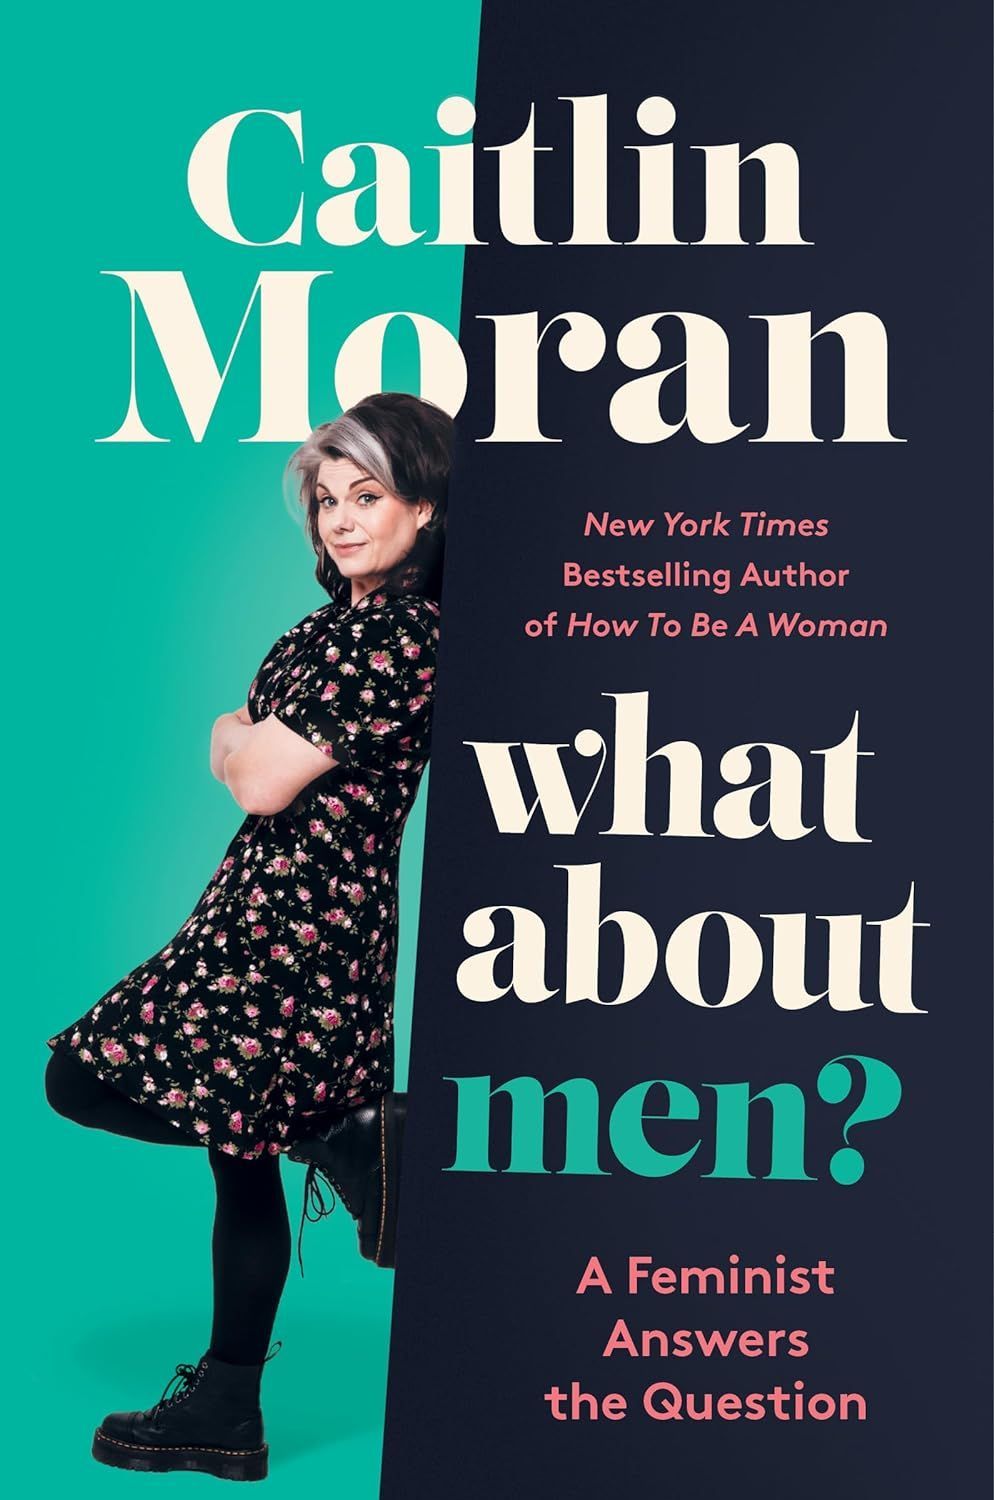 Do Women Have It Easier Than Men Now? On Caitlin Moran’s “What About Men?”